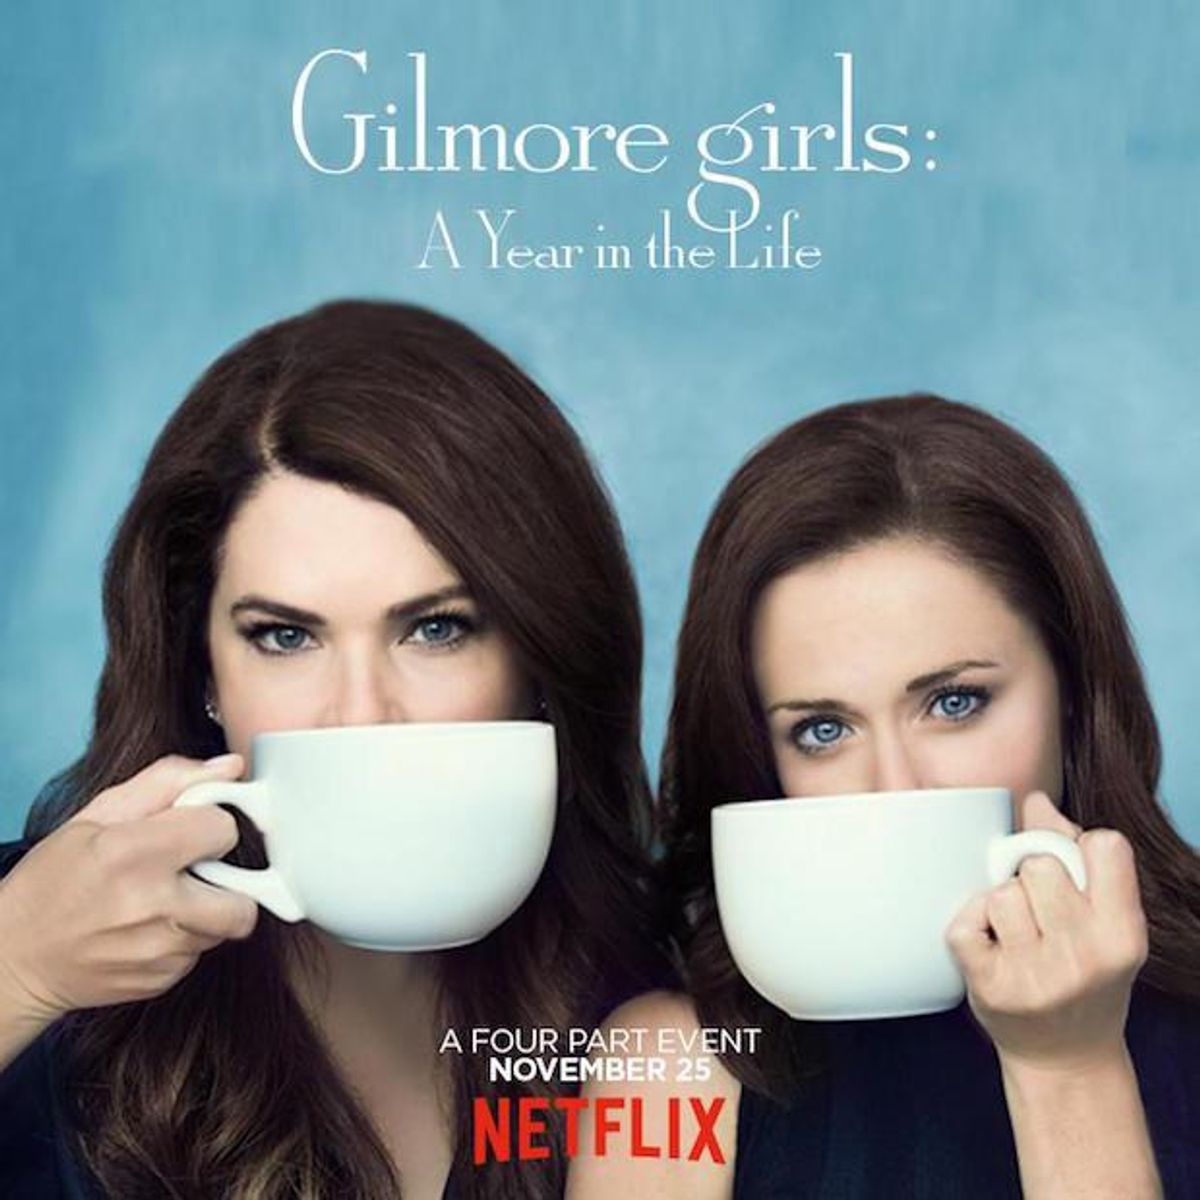 27 Thoughts During The Gilmore Girls Premiere